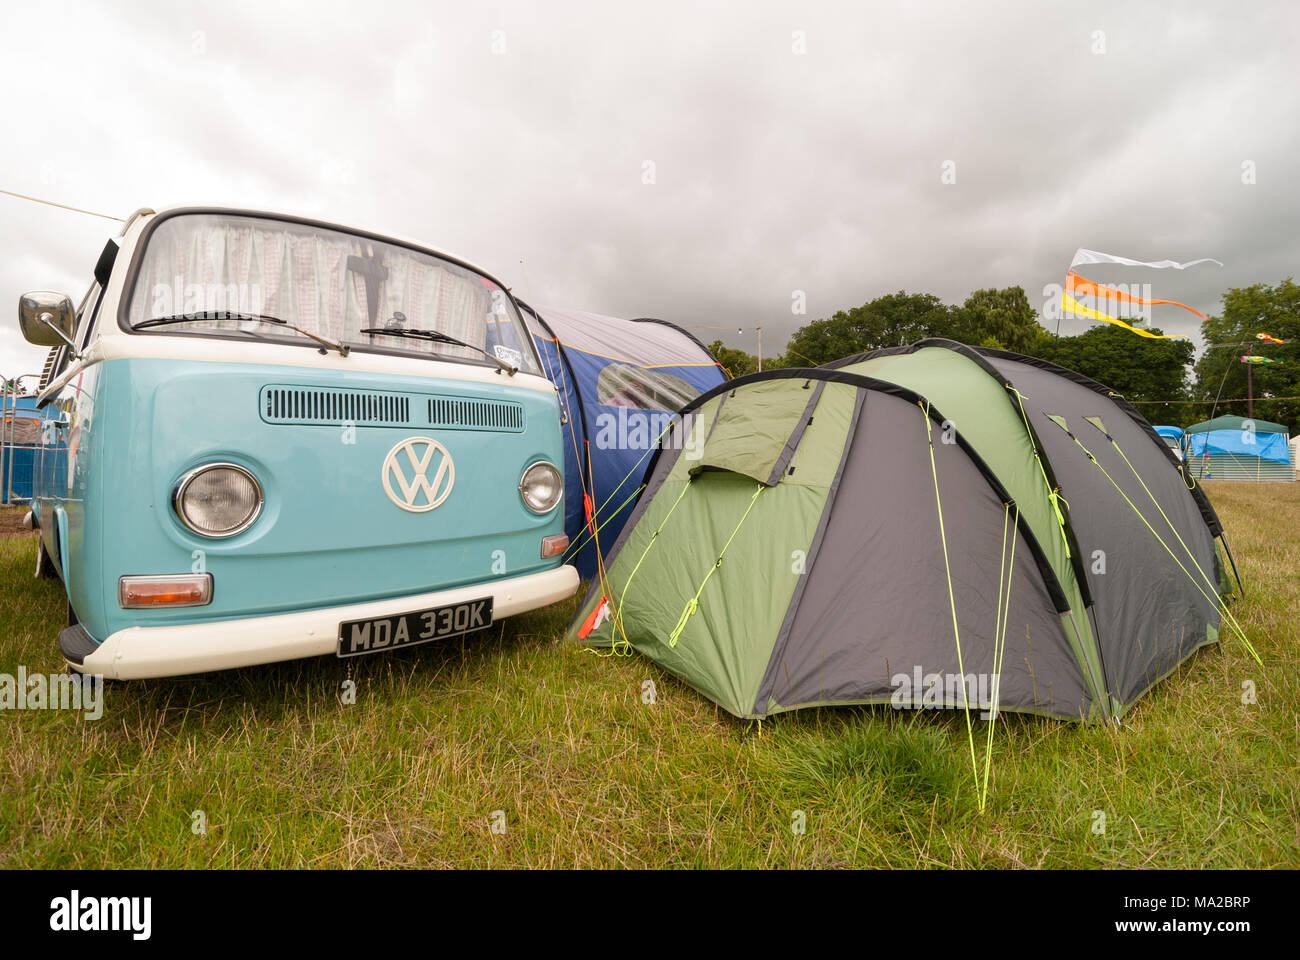 Blue and white vintage VW Camper van parked at a camp site with a tent next to it, Dorset, England, UK Stock Photo